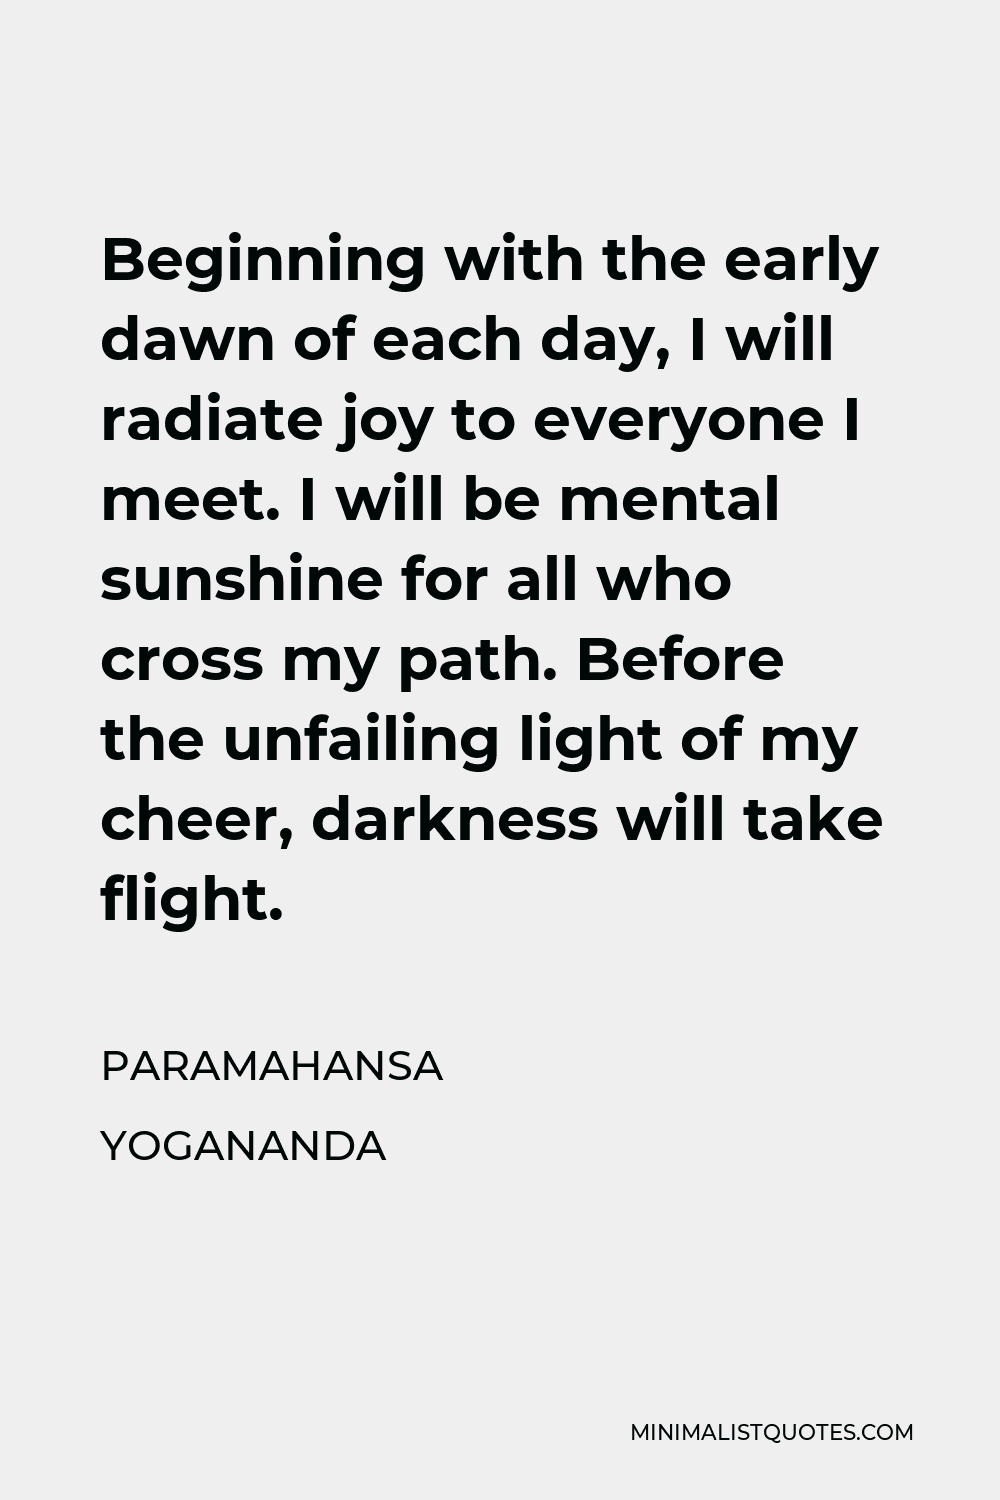 Paramahansa Yogananda Quote - Beginning with the early dawn of each day, I will radiate joy to everyone I meet. I will be mental sunshine for all who cross my path. Before the unfailing light of my cheer, darkness will take flight.